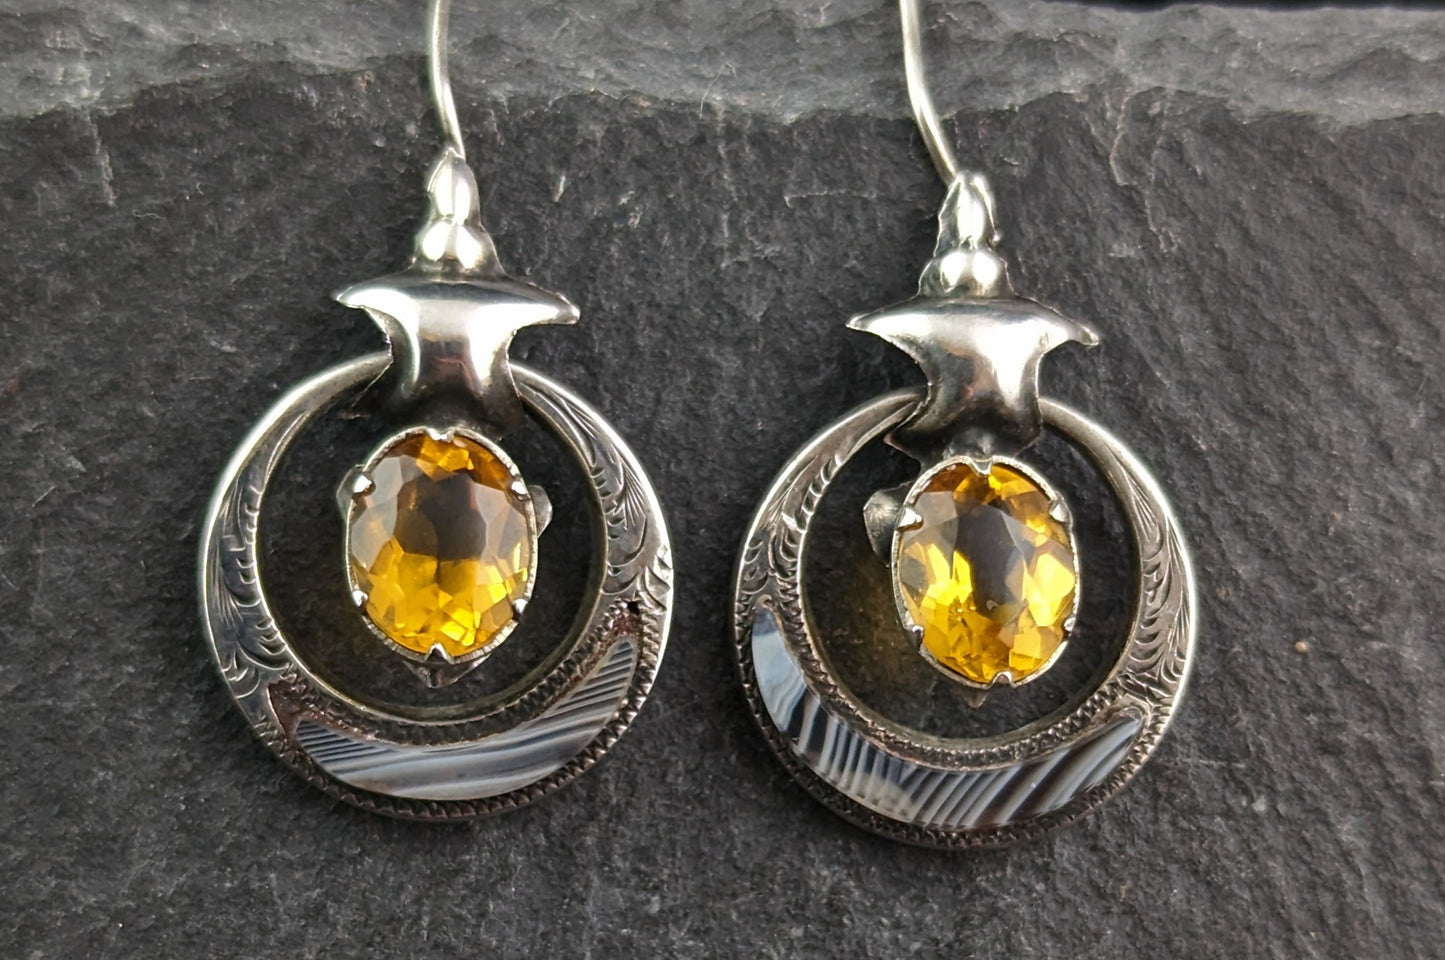 Antique Victorian Scottish agate drop earrings, Sterling silver